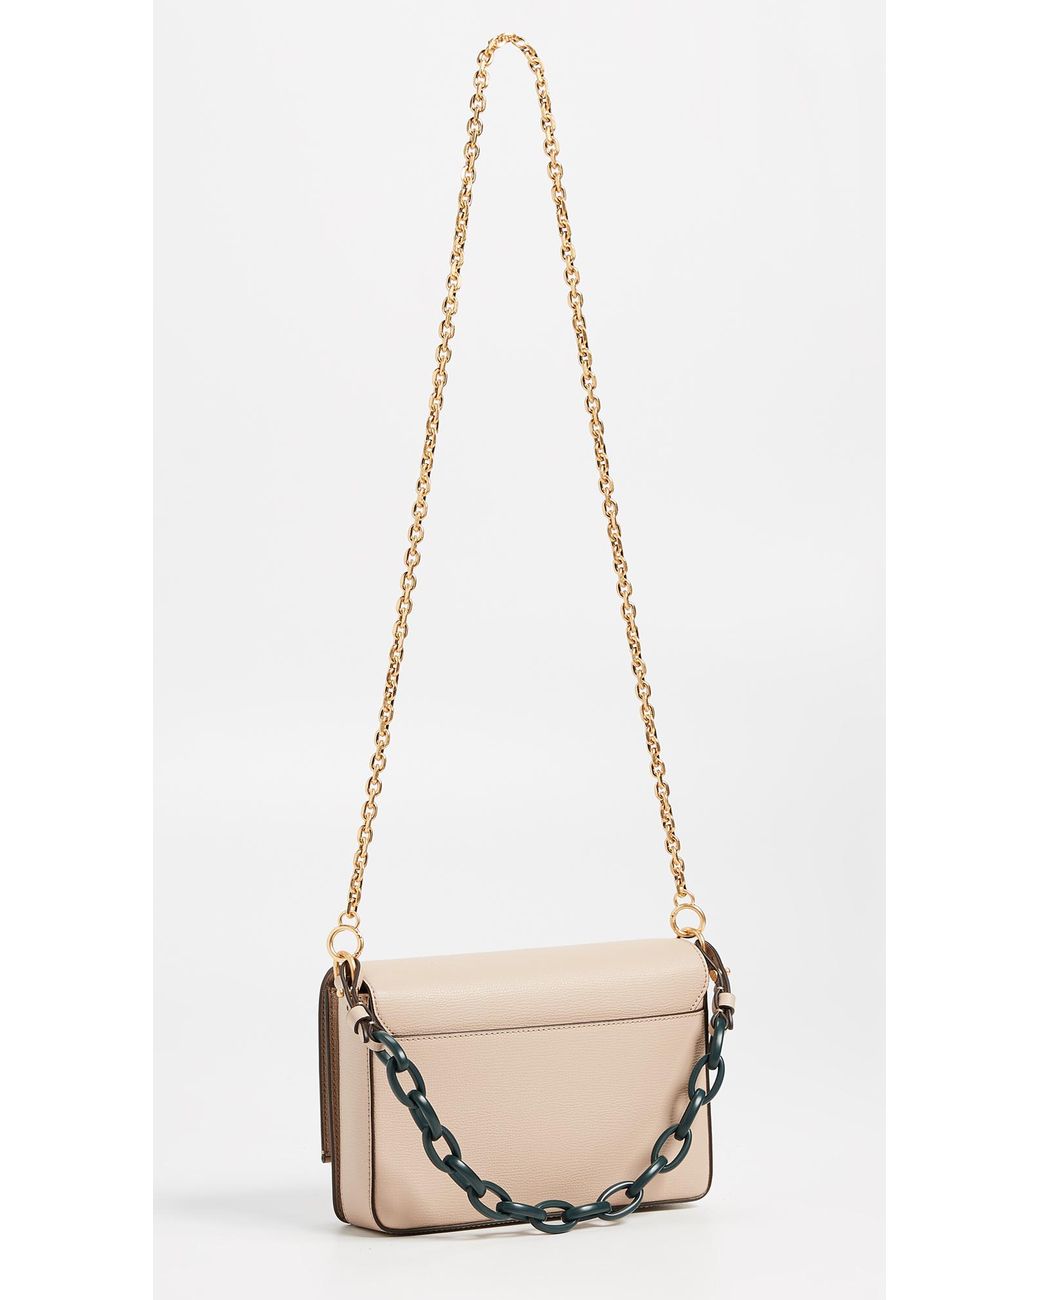 Tory Burch Kira Double Strap Shoulder Bag in Natural | Lyst